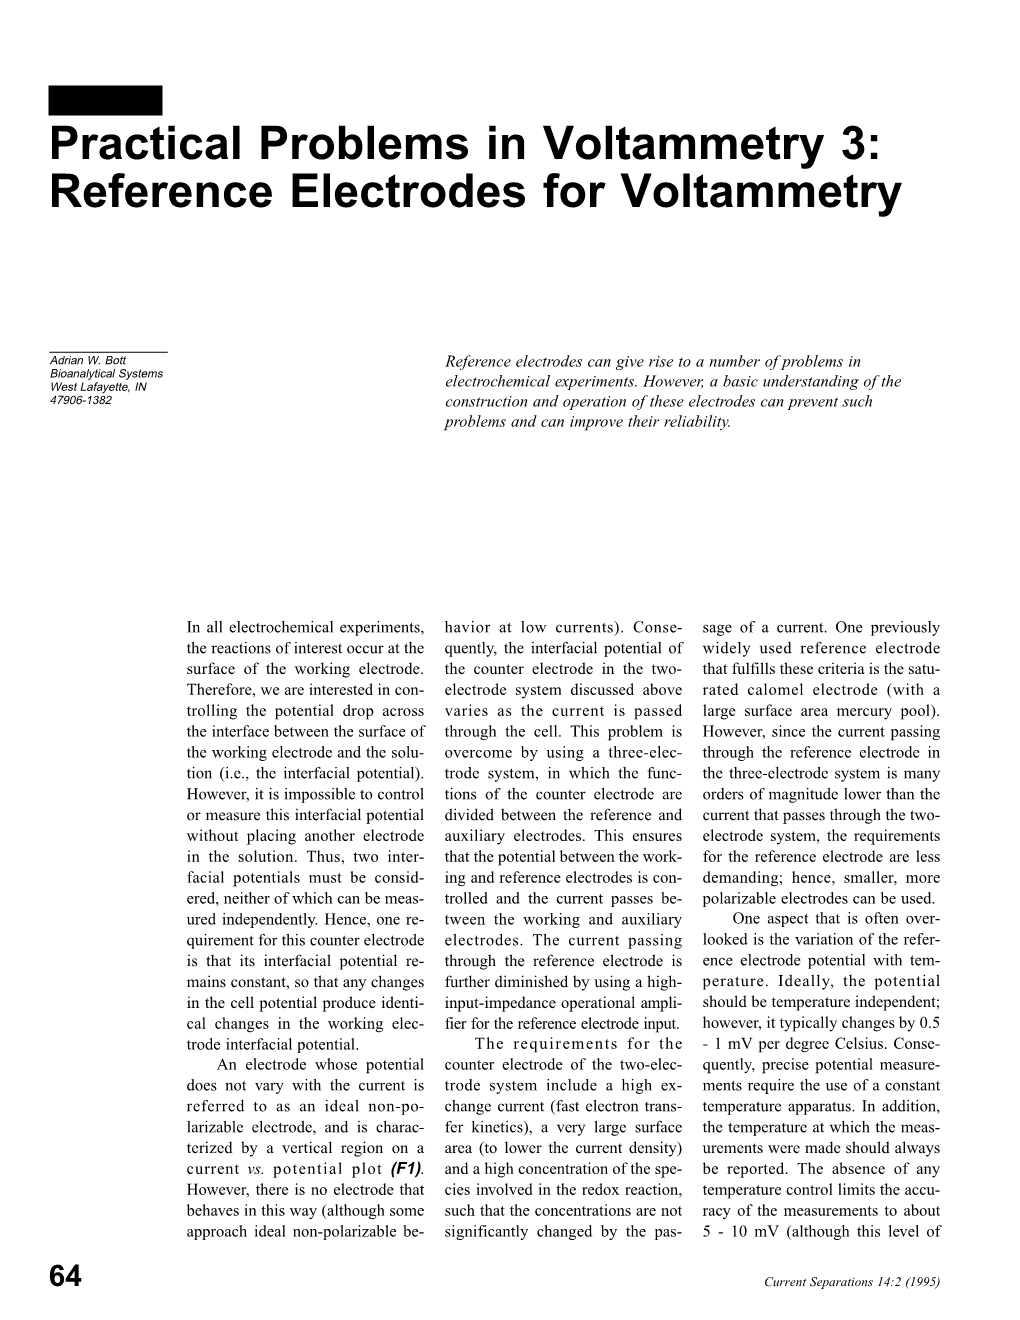 Practical Problems in Voltammetry 3: Reference Electrodes for Voltammetry